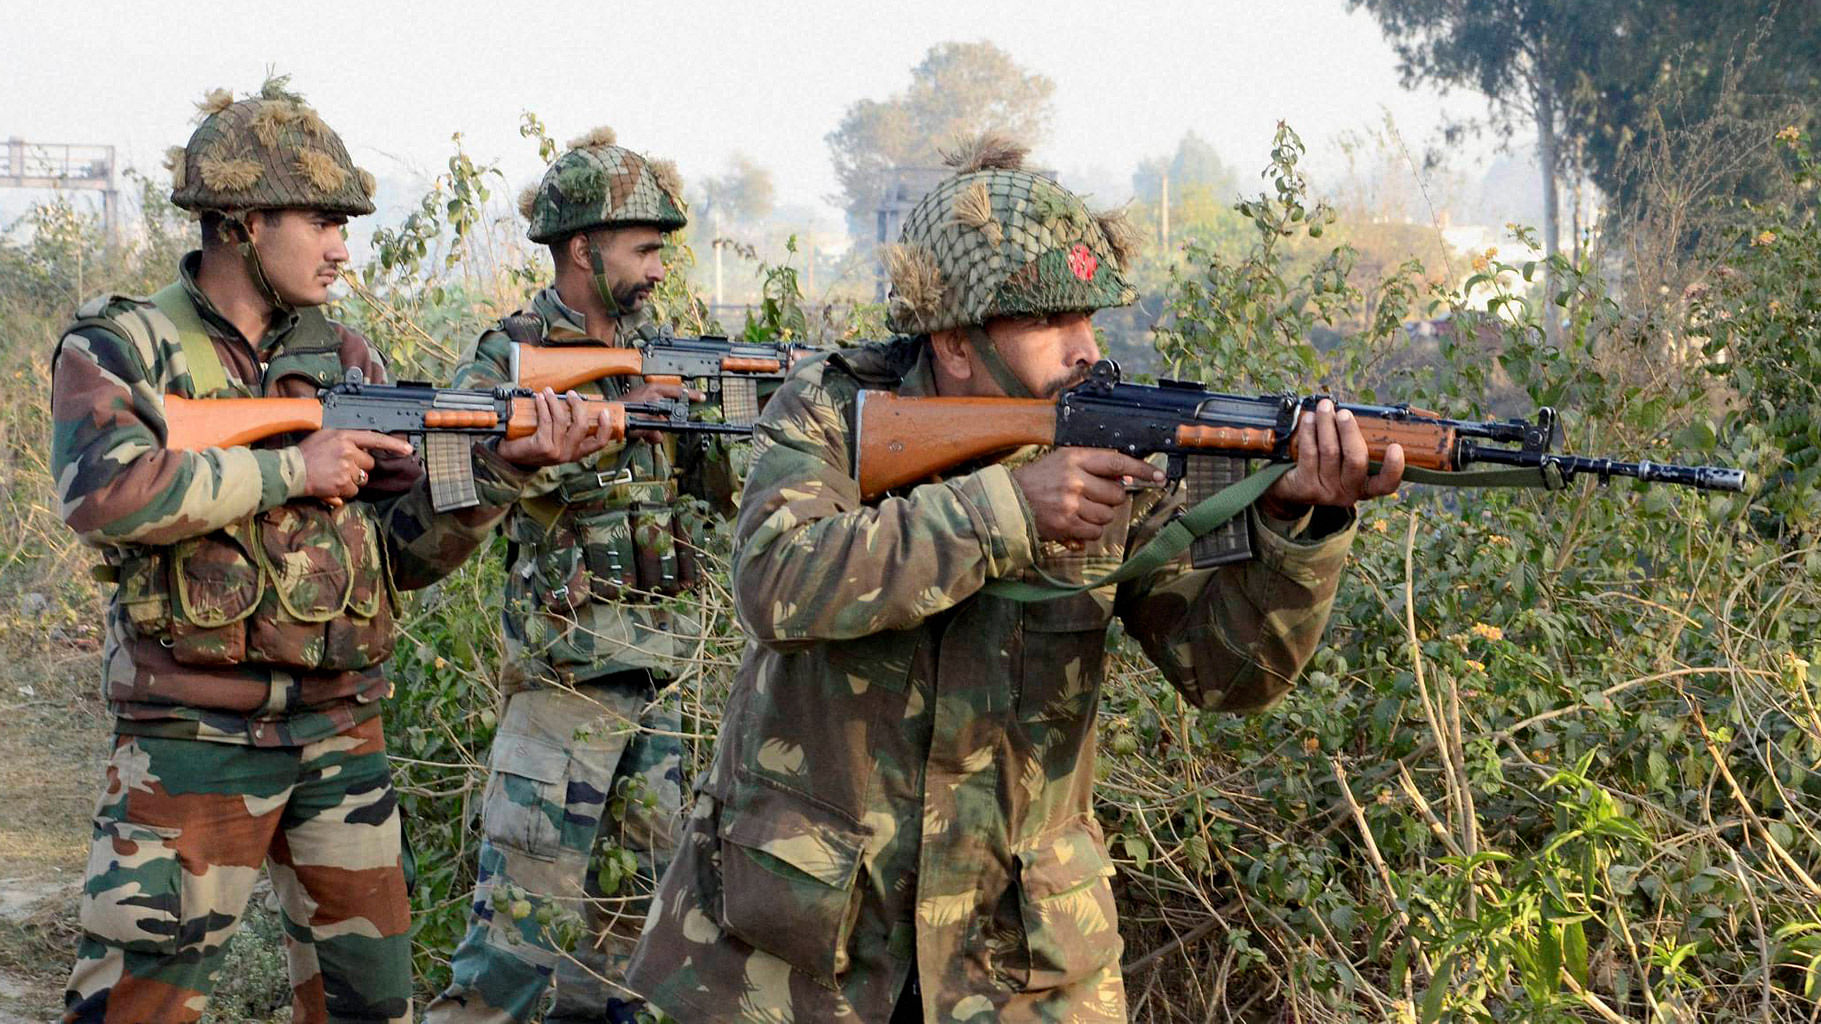 Pathankot: Working on Leads, Want to Sustain Dialogue Says Pak